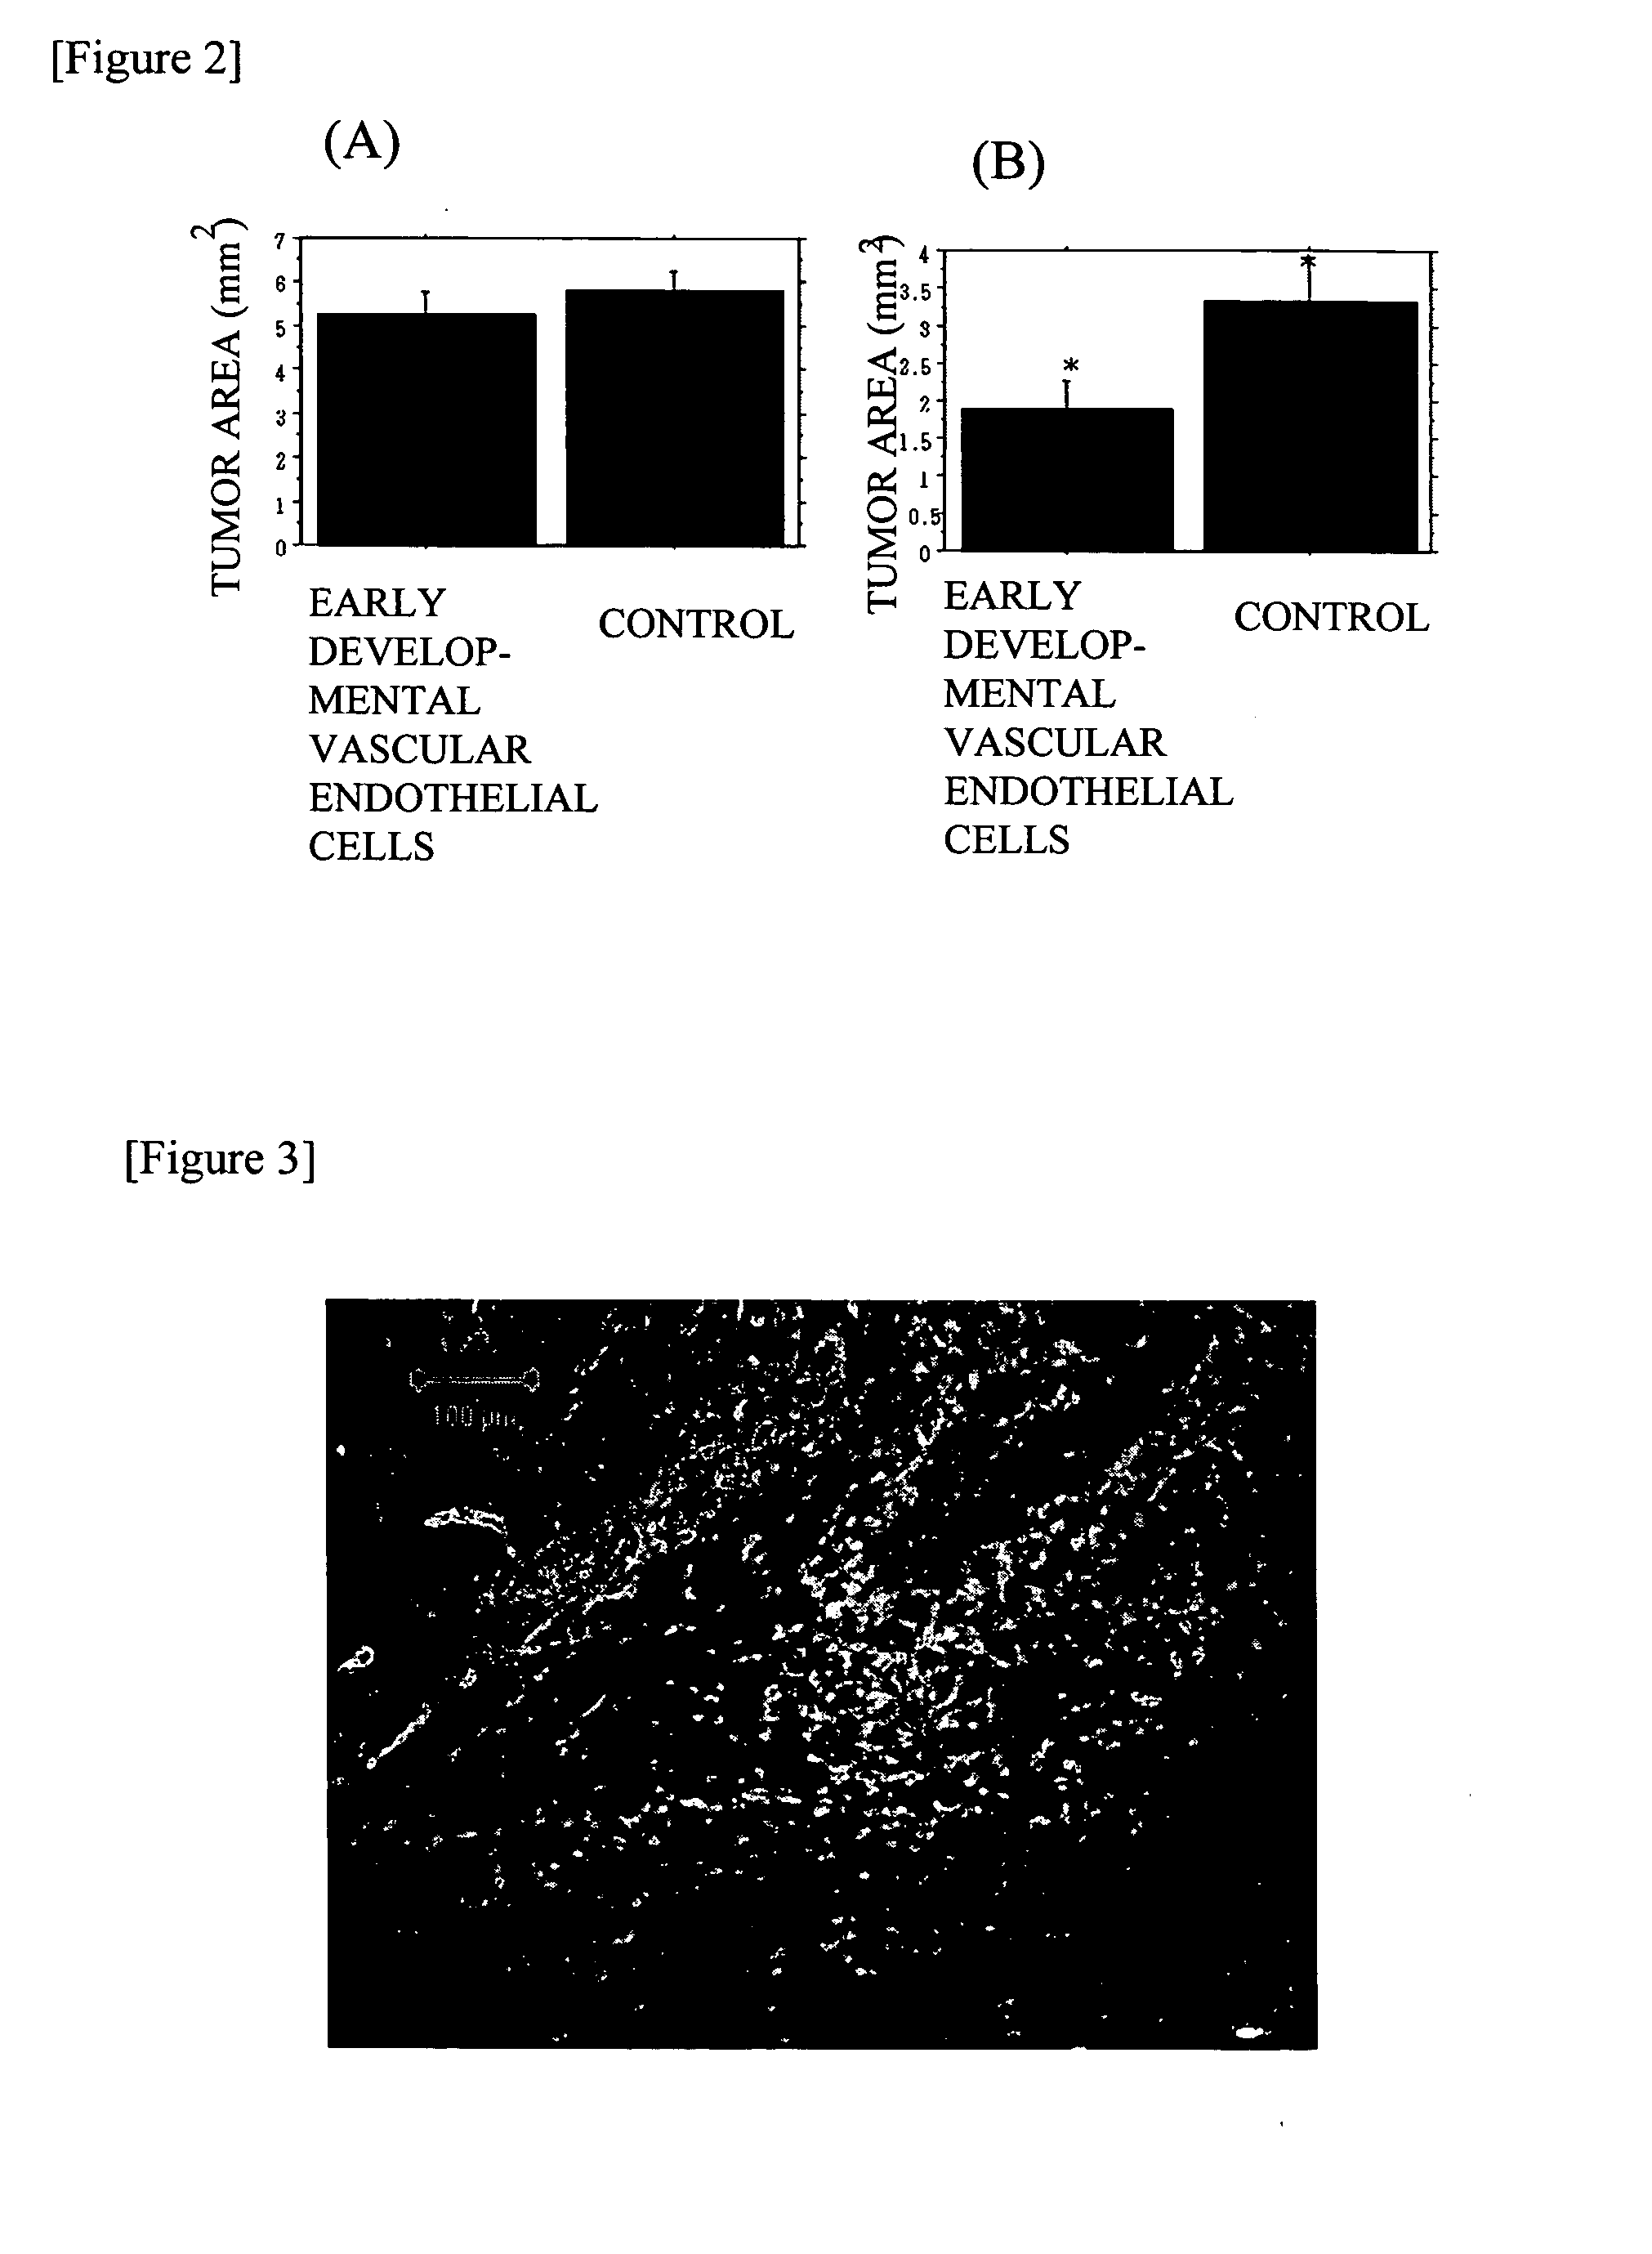 Method Of Producing Vascular Endothelial Cells From Primate Embryonic Stem Cells